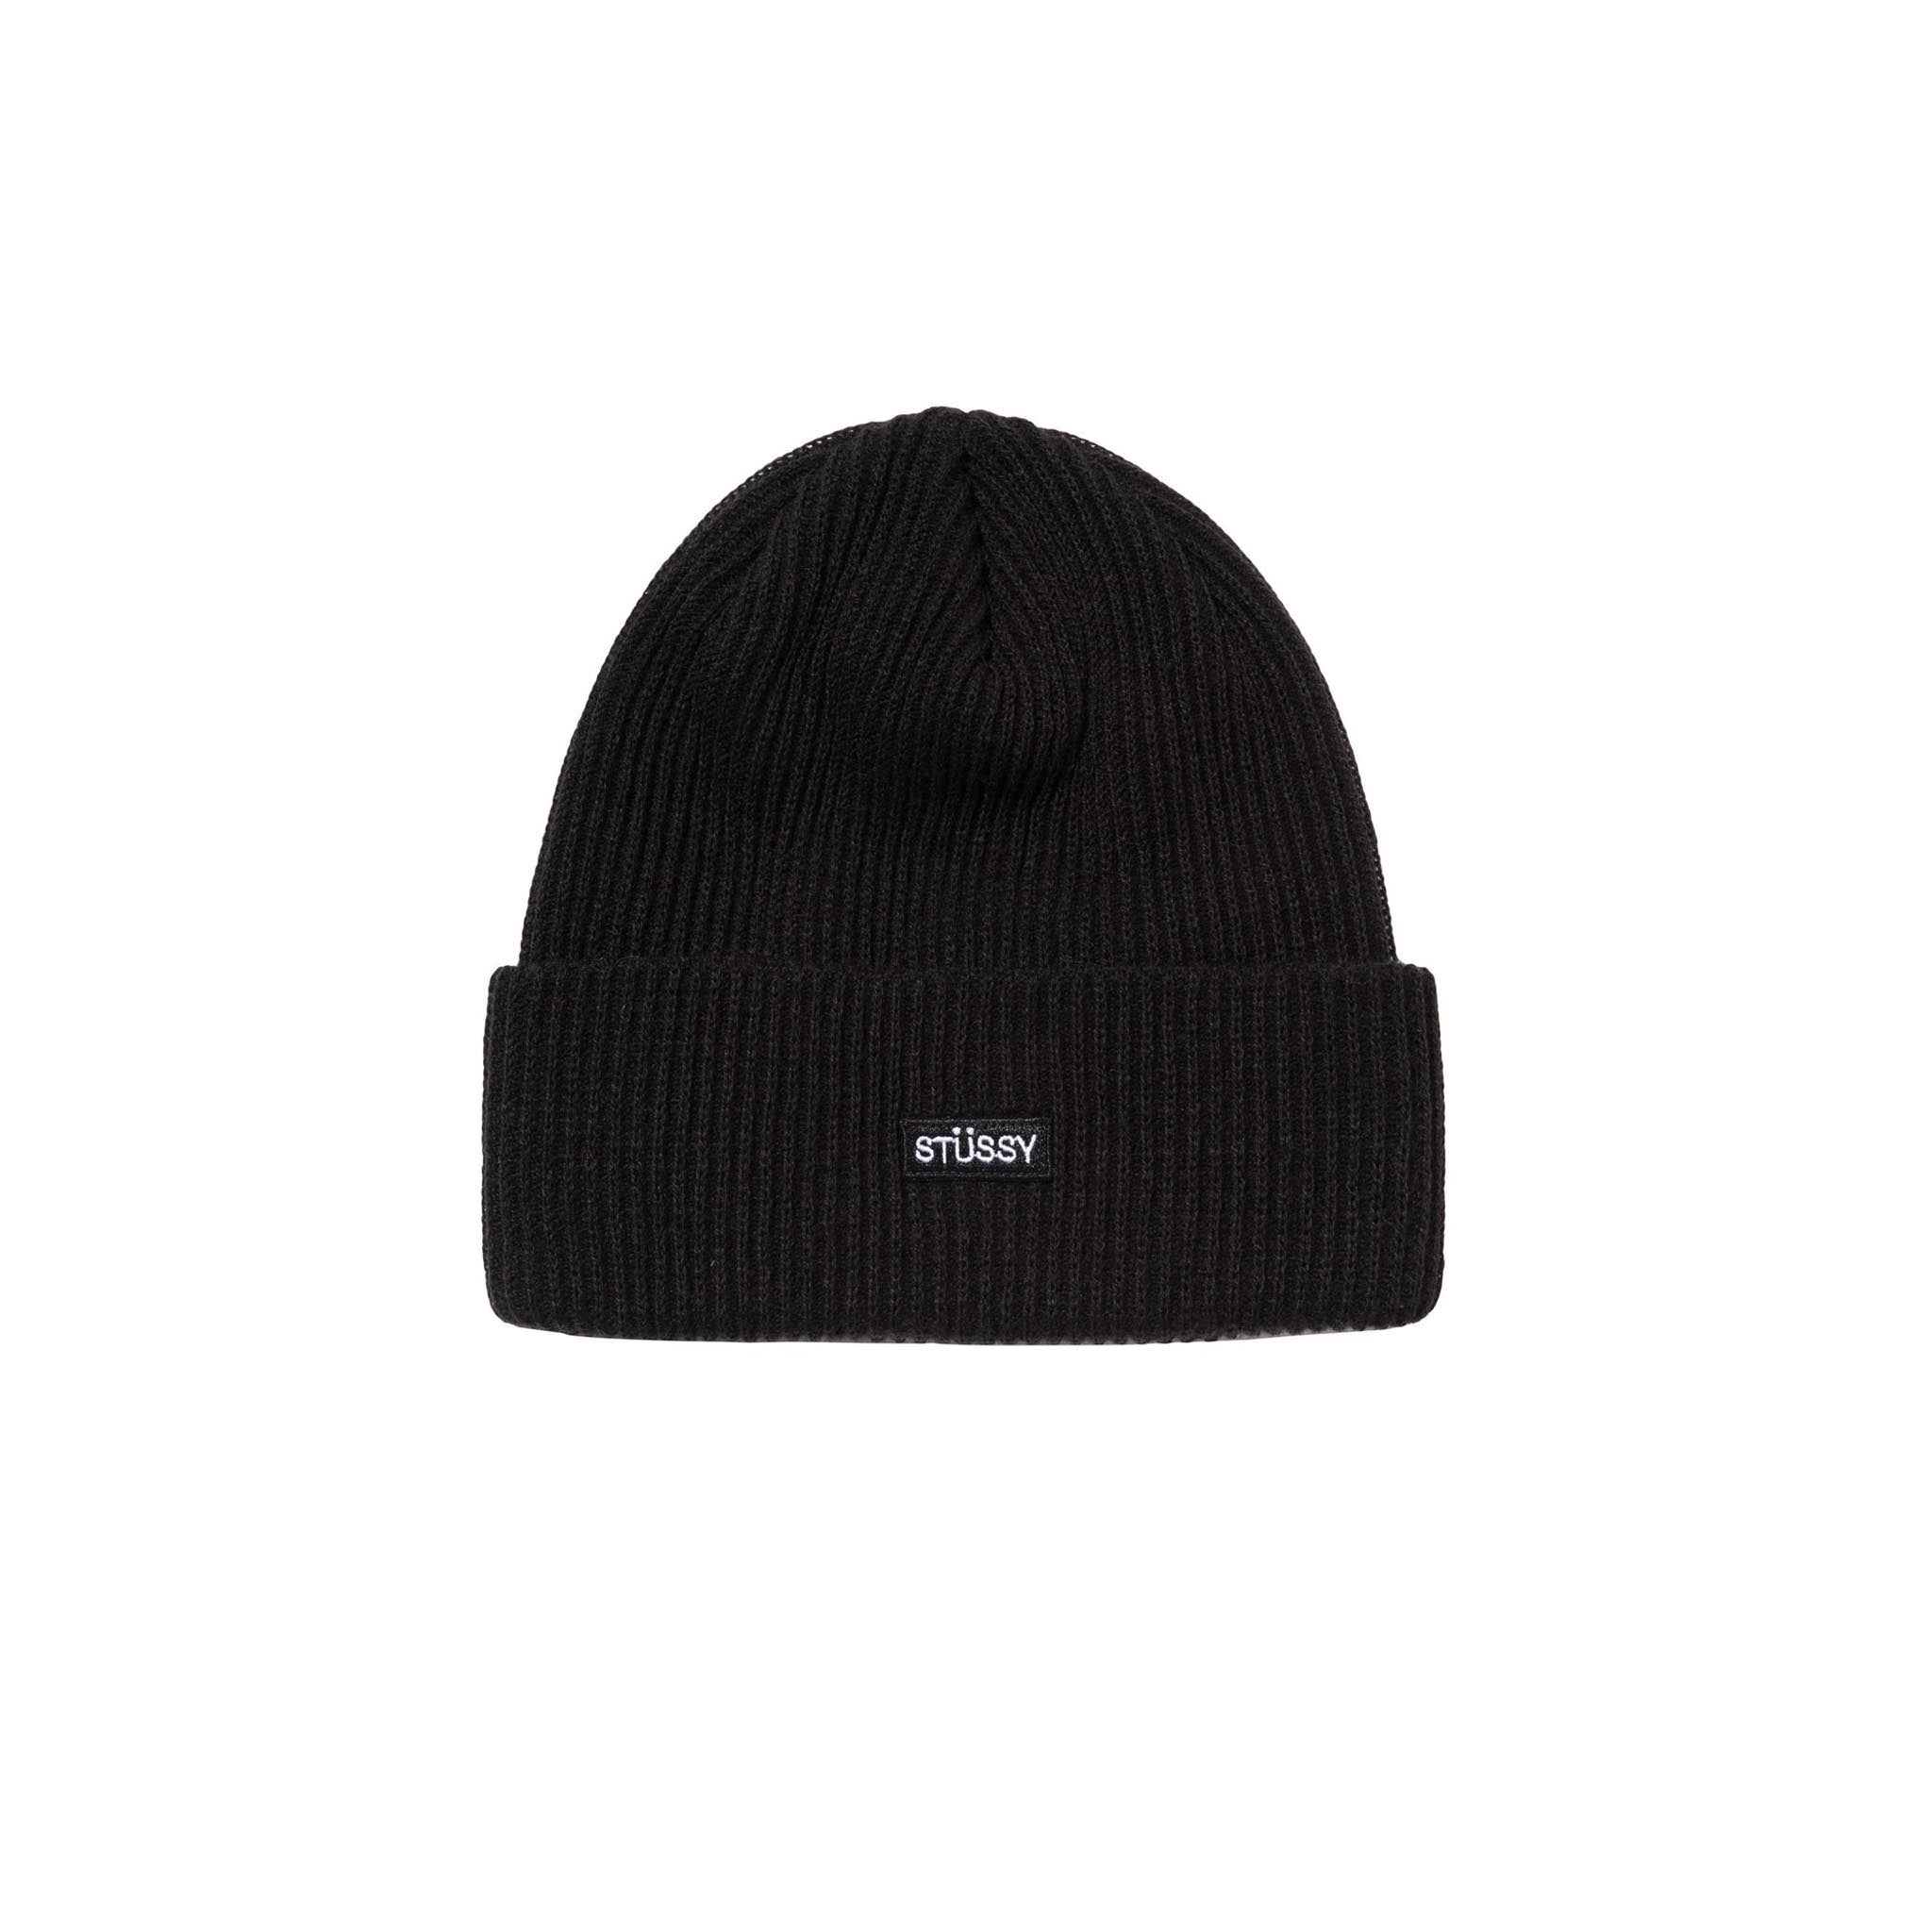 Stussy Small Patch Watchcap Beanie Black